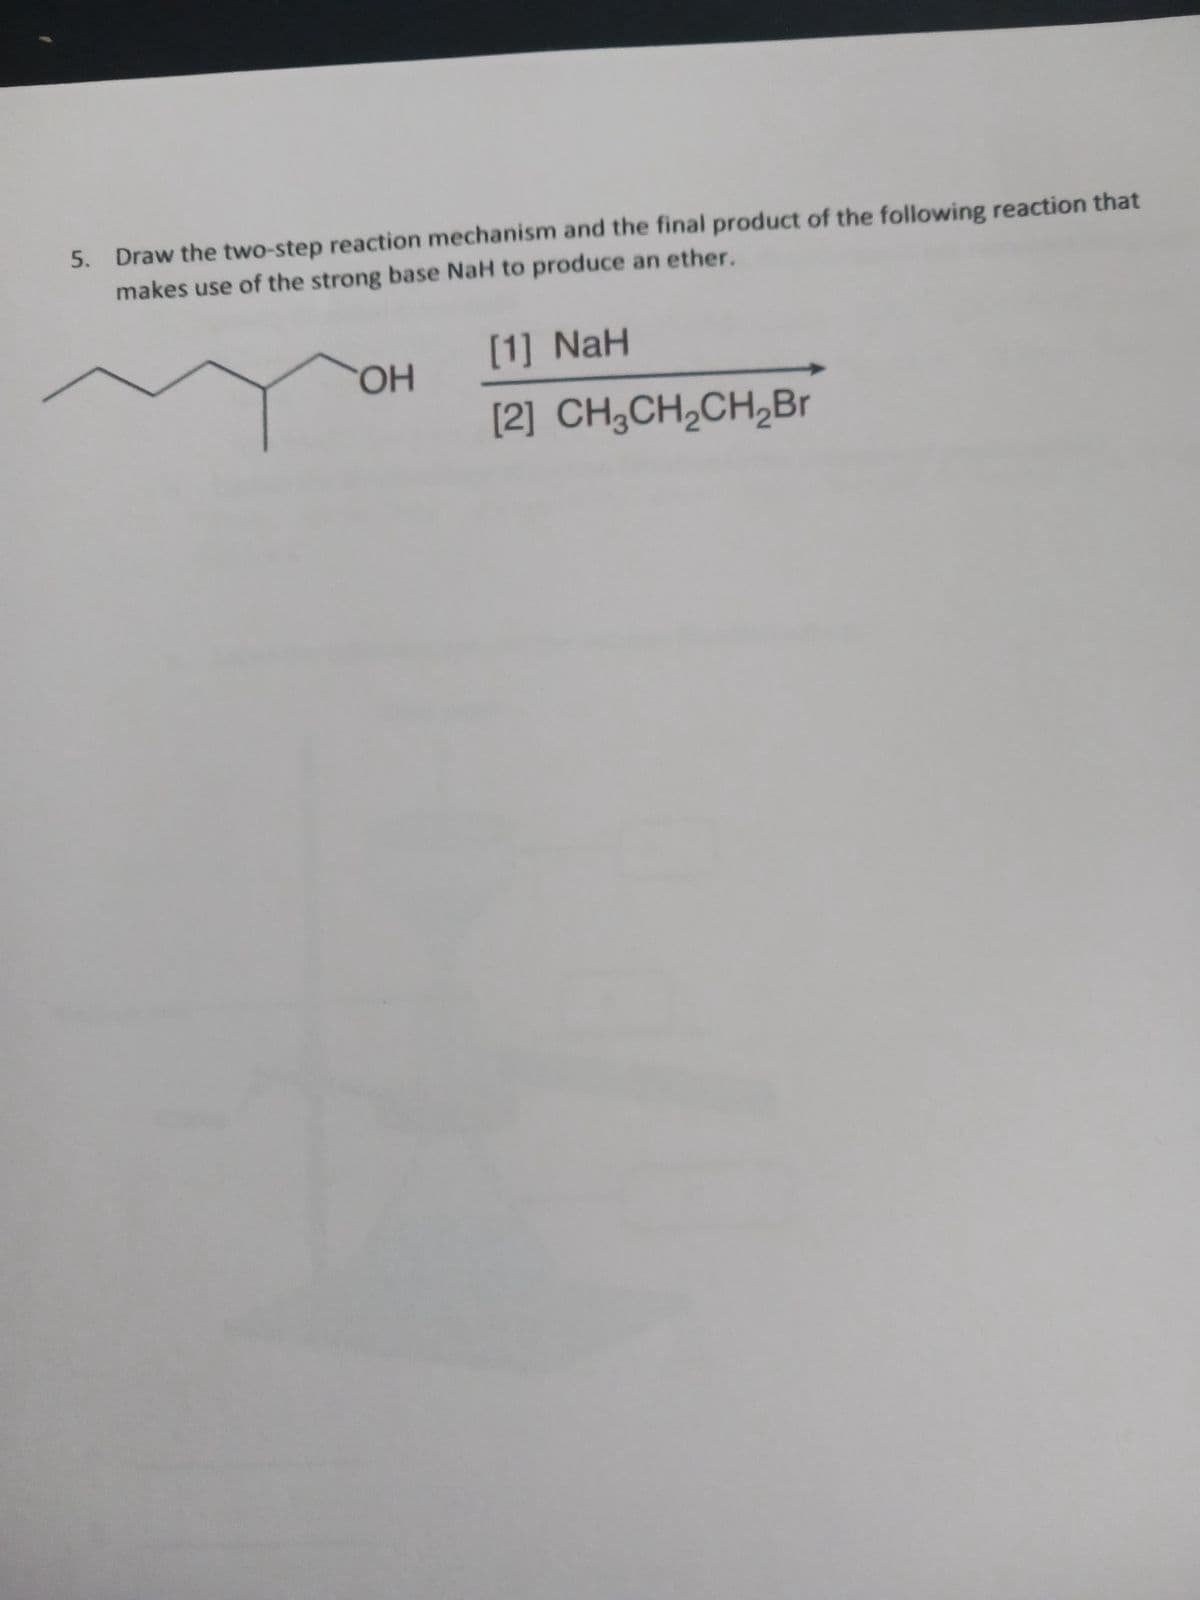 5. Draw the two-step reaction mechanism and the final product of the following reaction that
makes use of the strong base NaH to produce an ether.
OH
[1] NaH
[2] CH3CH₂CH₂Br